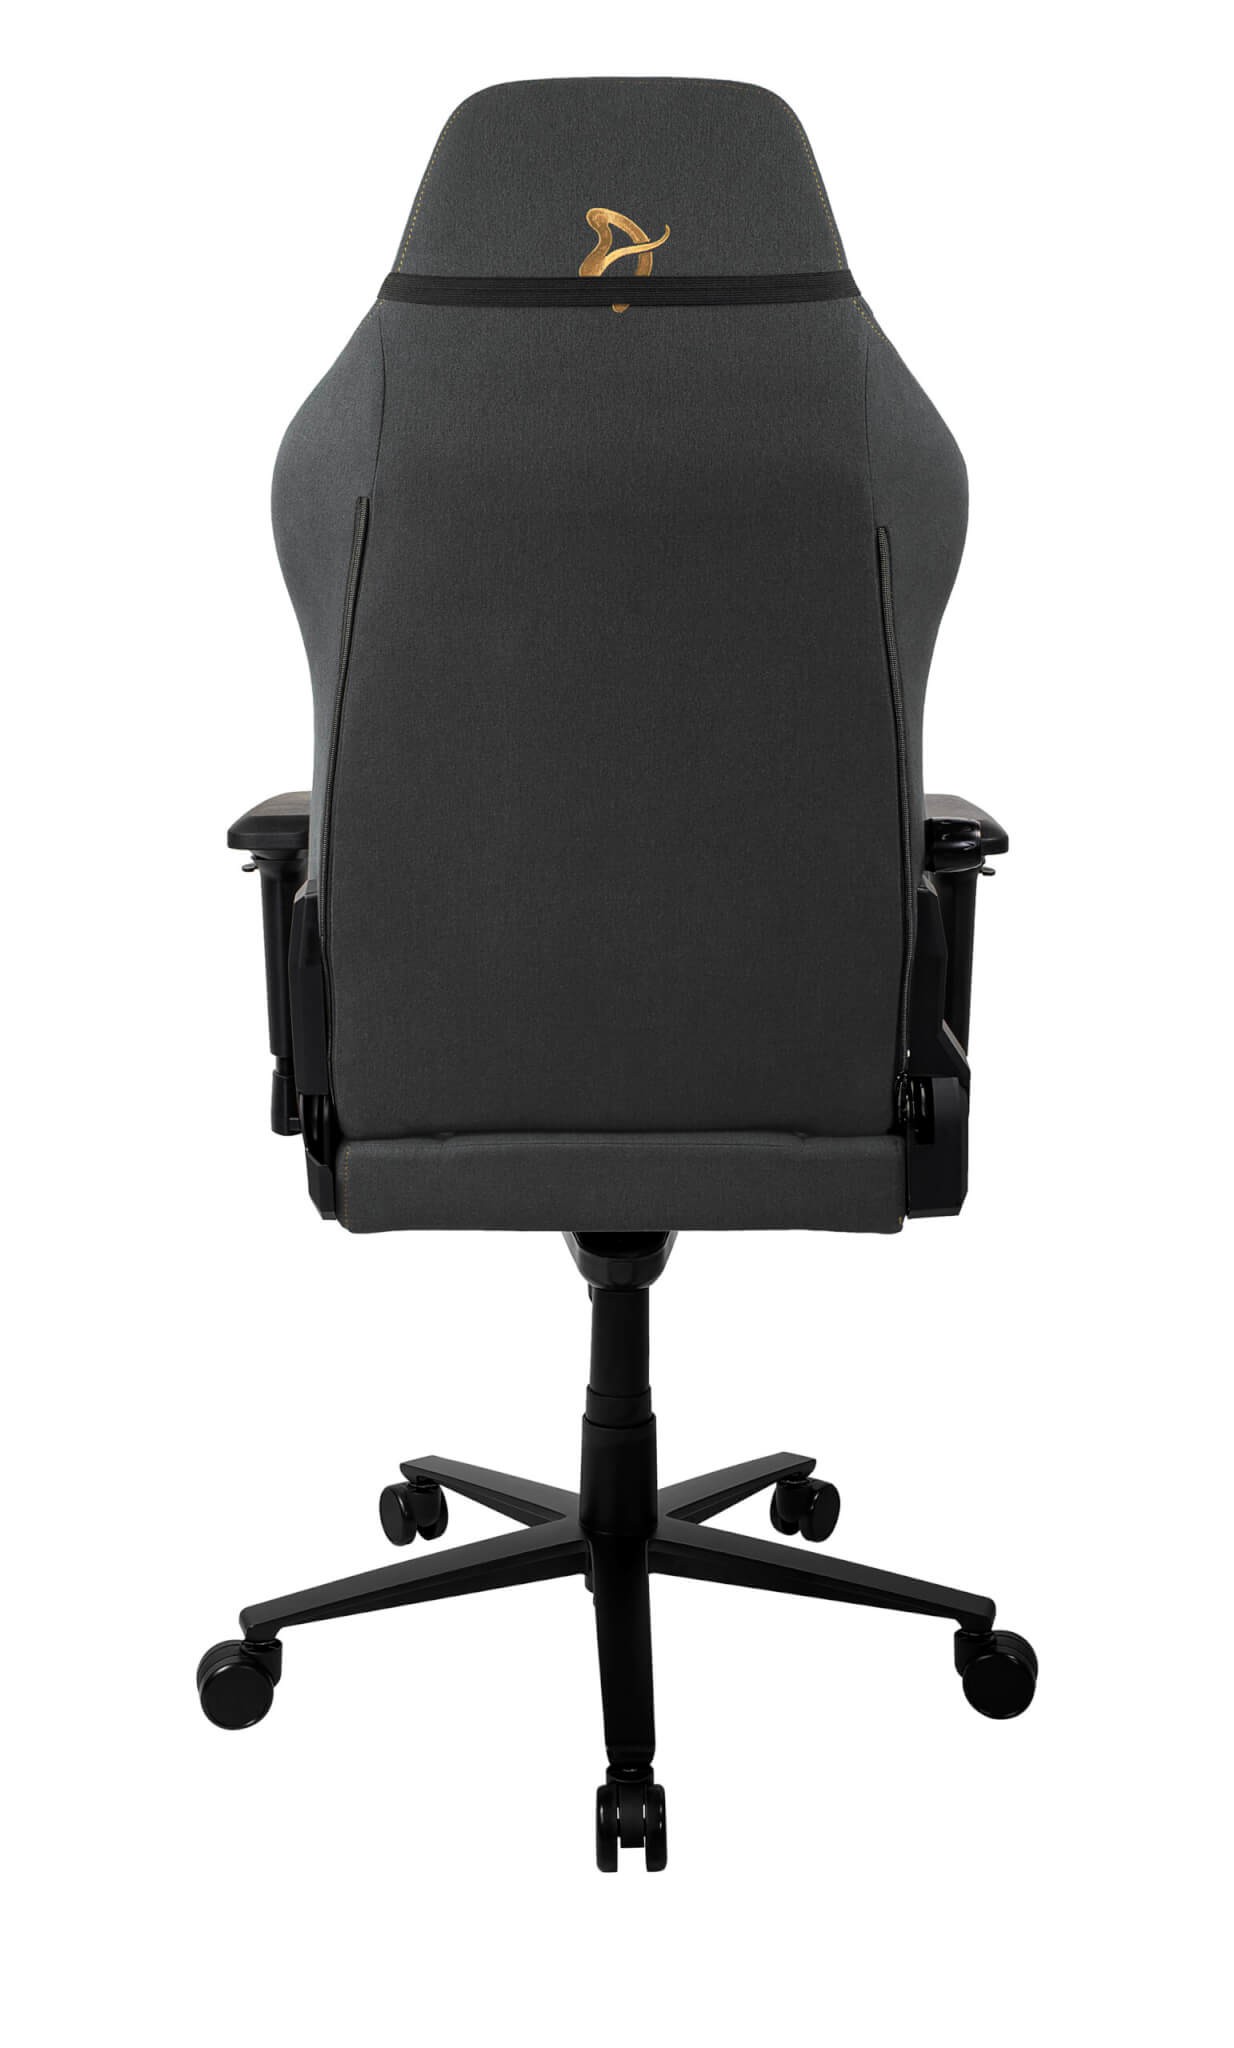 Buy Arozzi PRIMO WOVEN FABRIC black/gold gaming chair